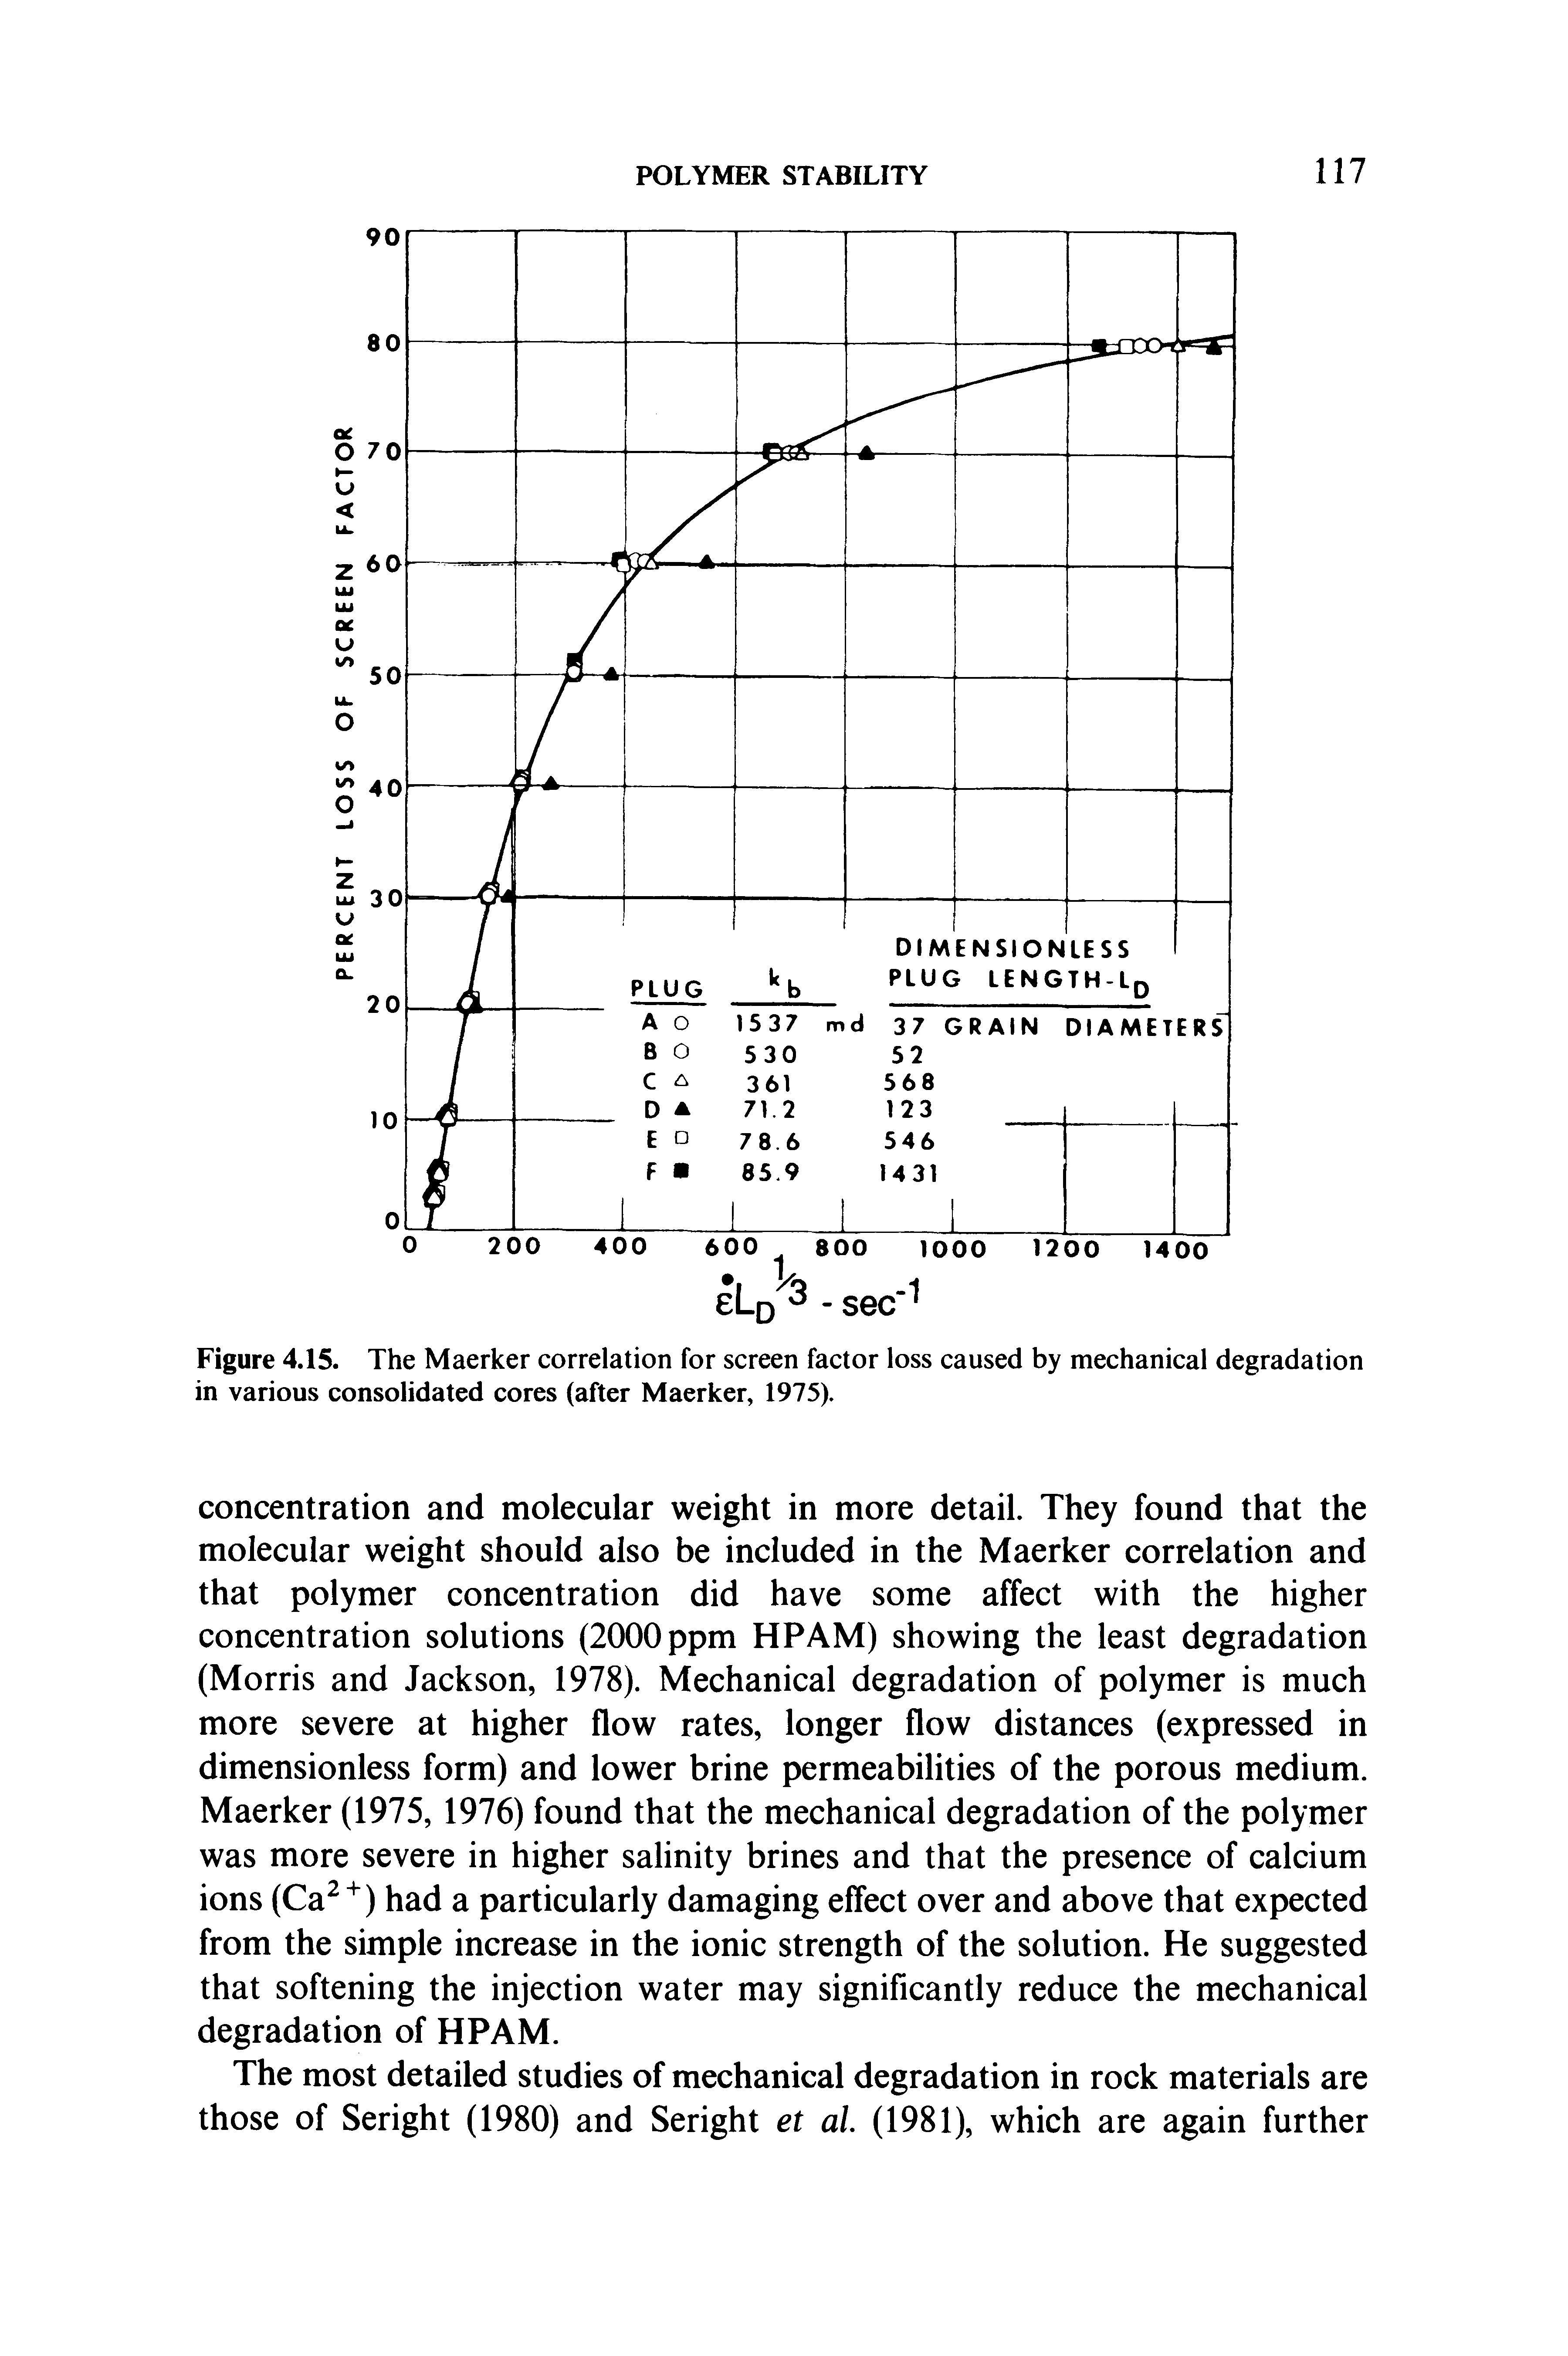 Figure 4.15. The Maerker correlation for screen factor loss caused by mechanical degradation in various consolidated cores (after Maerker, 1975).